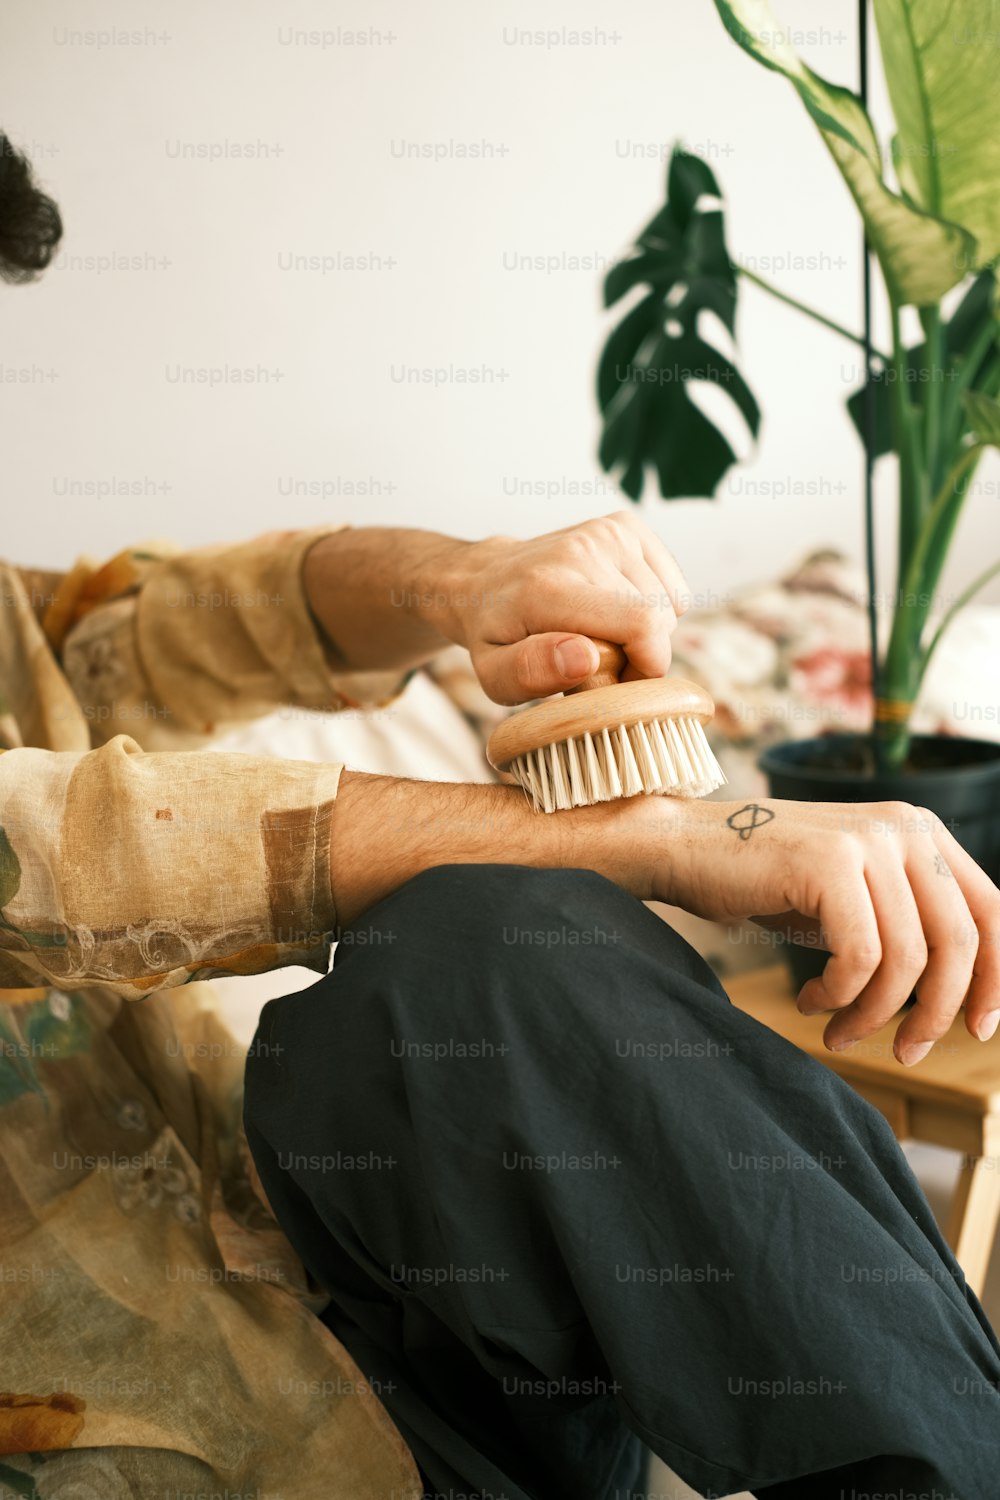 a man sitting on a couch with a brush in his hand